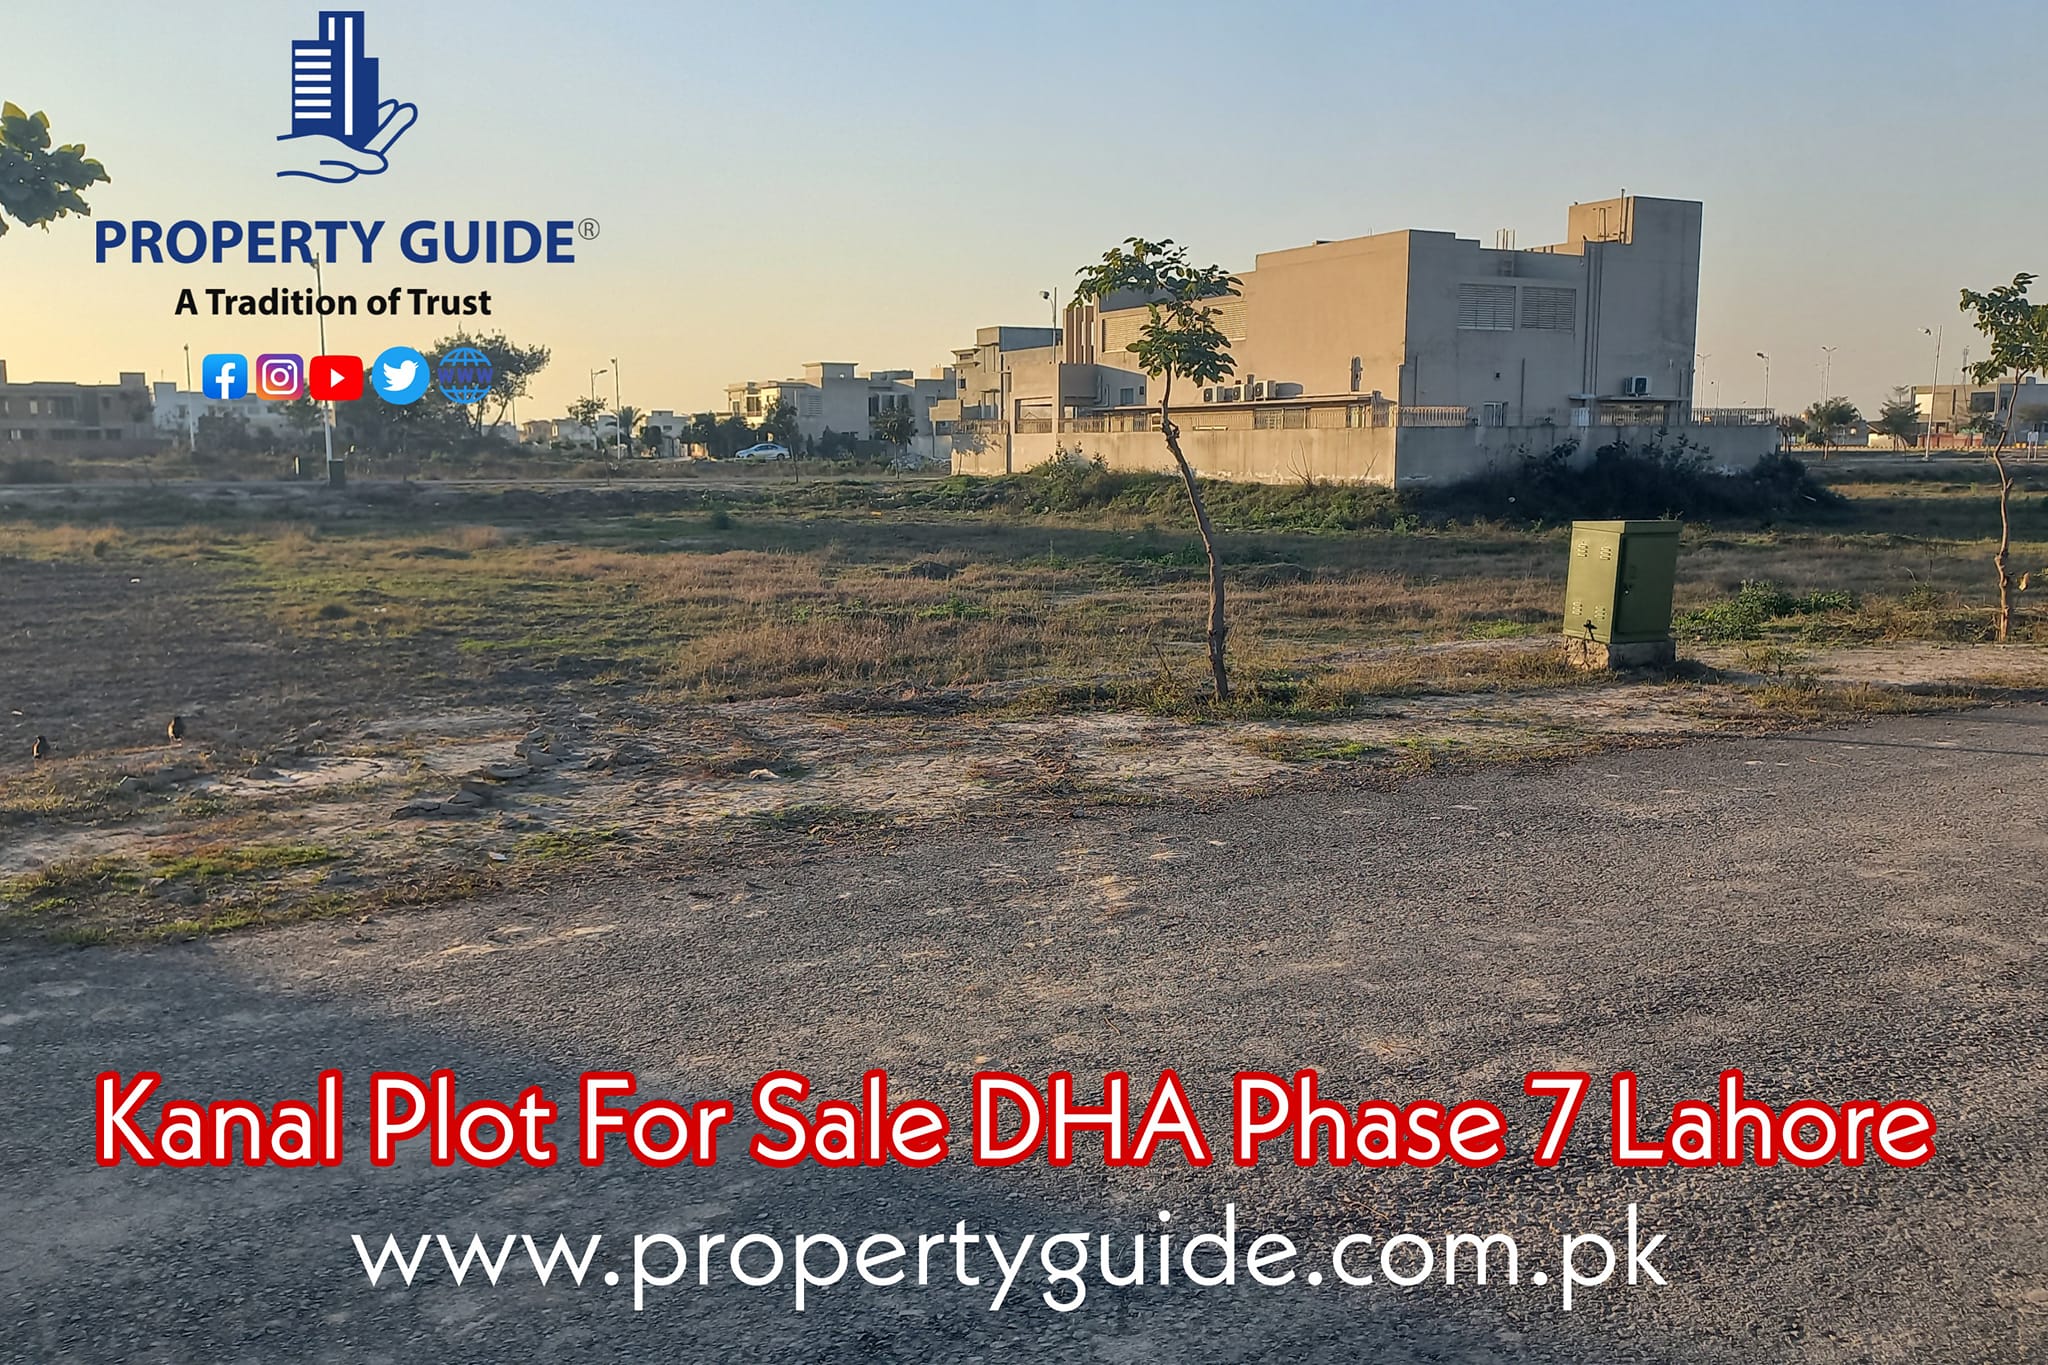 1 Kanal Plot For Sale DHA Lahore Phase 7 S 432